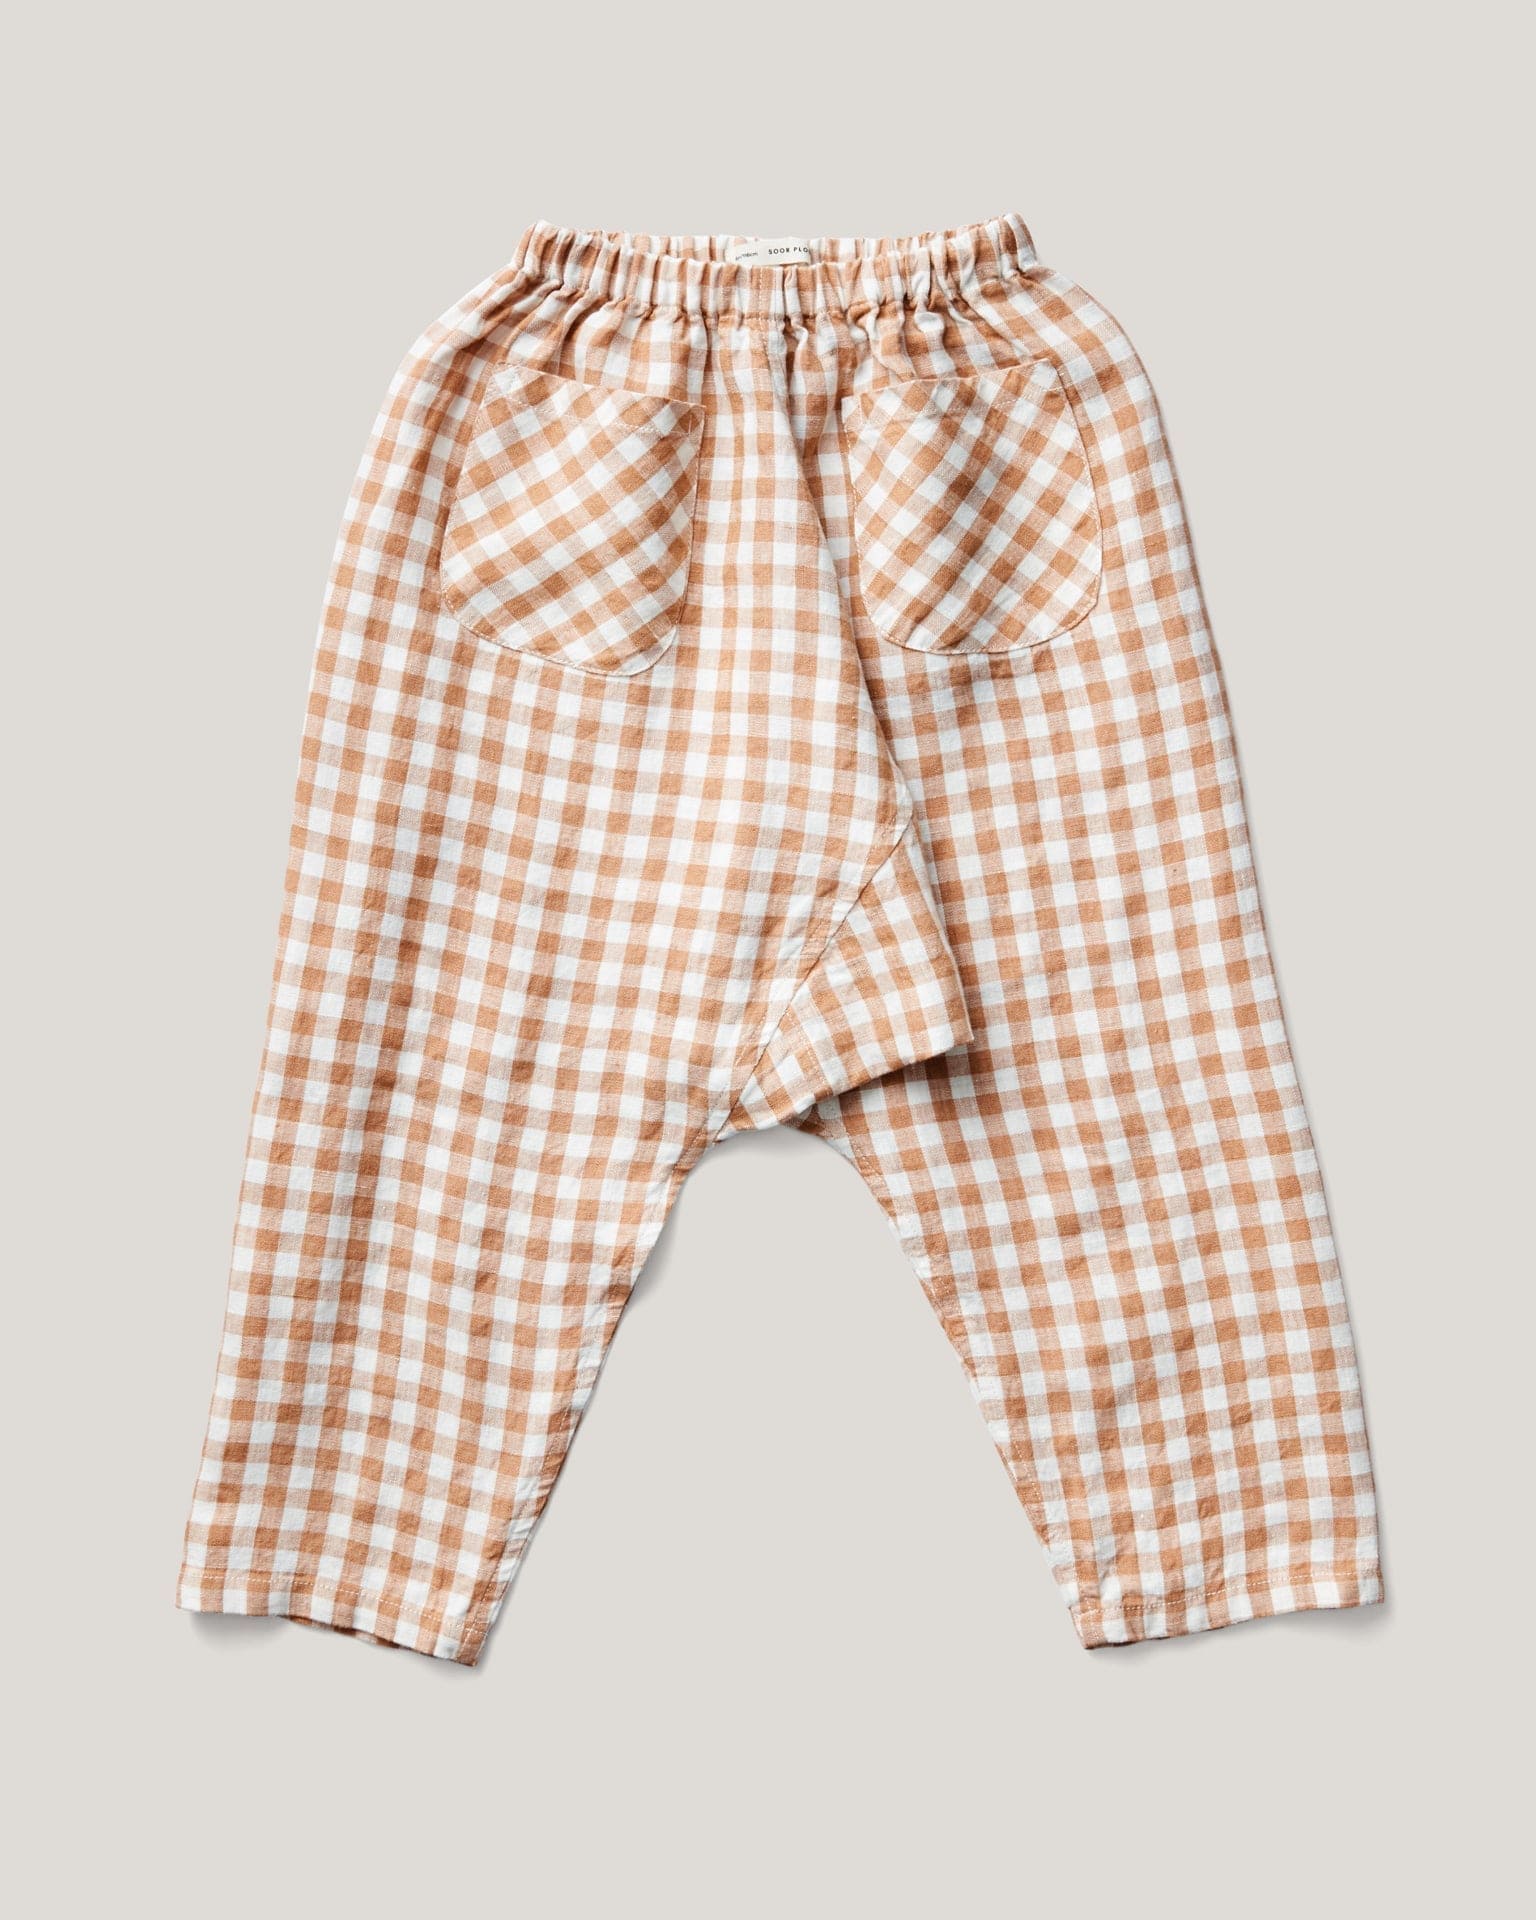 otto trouser in gingham